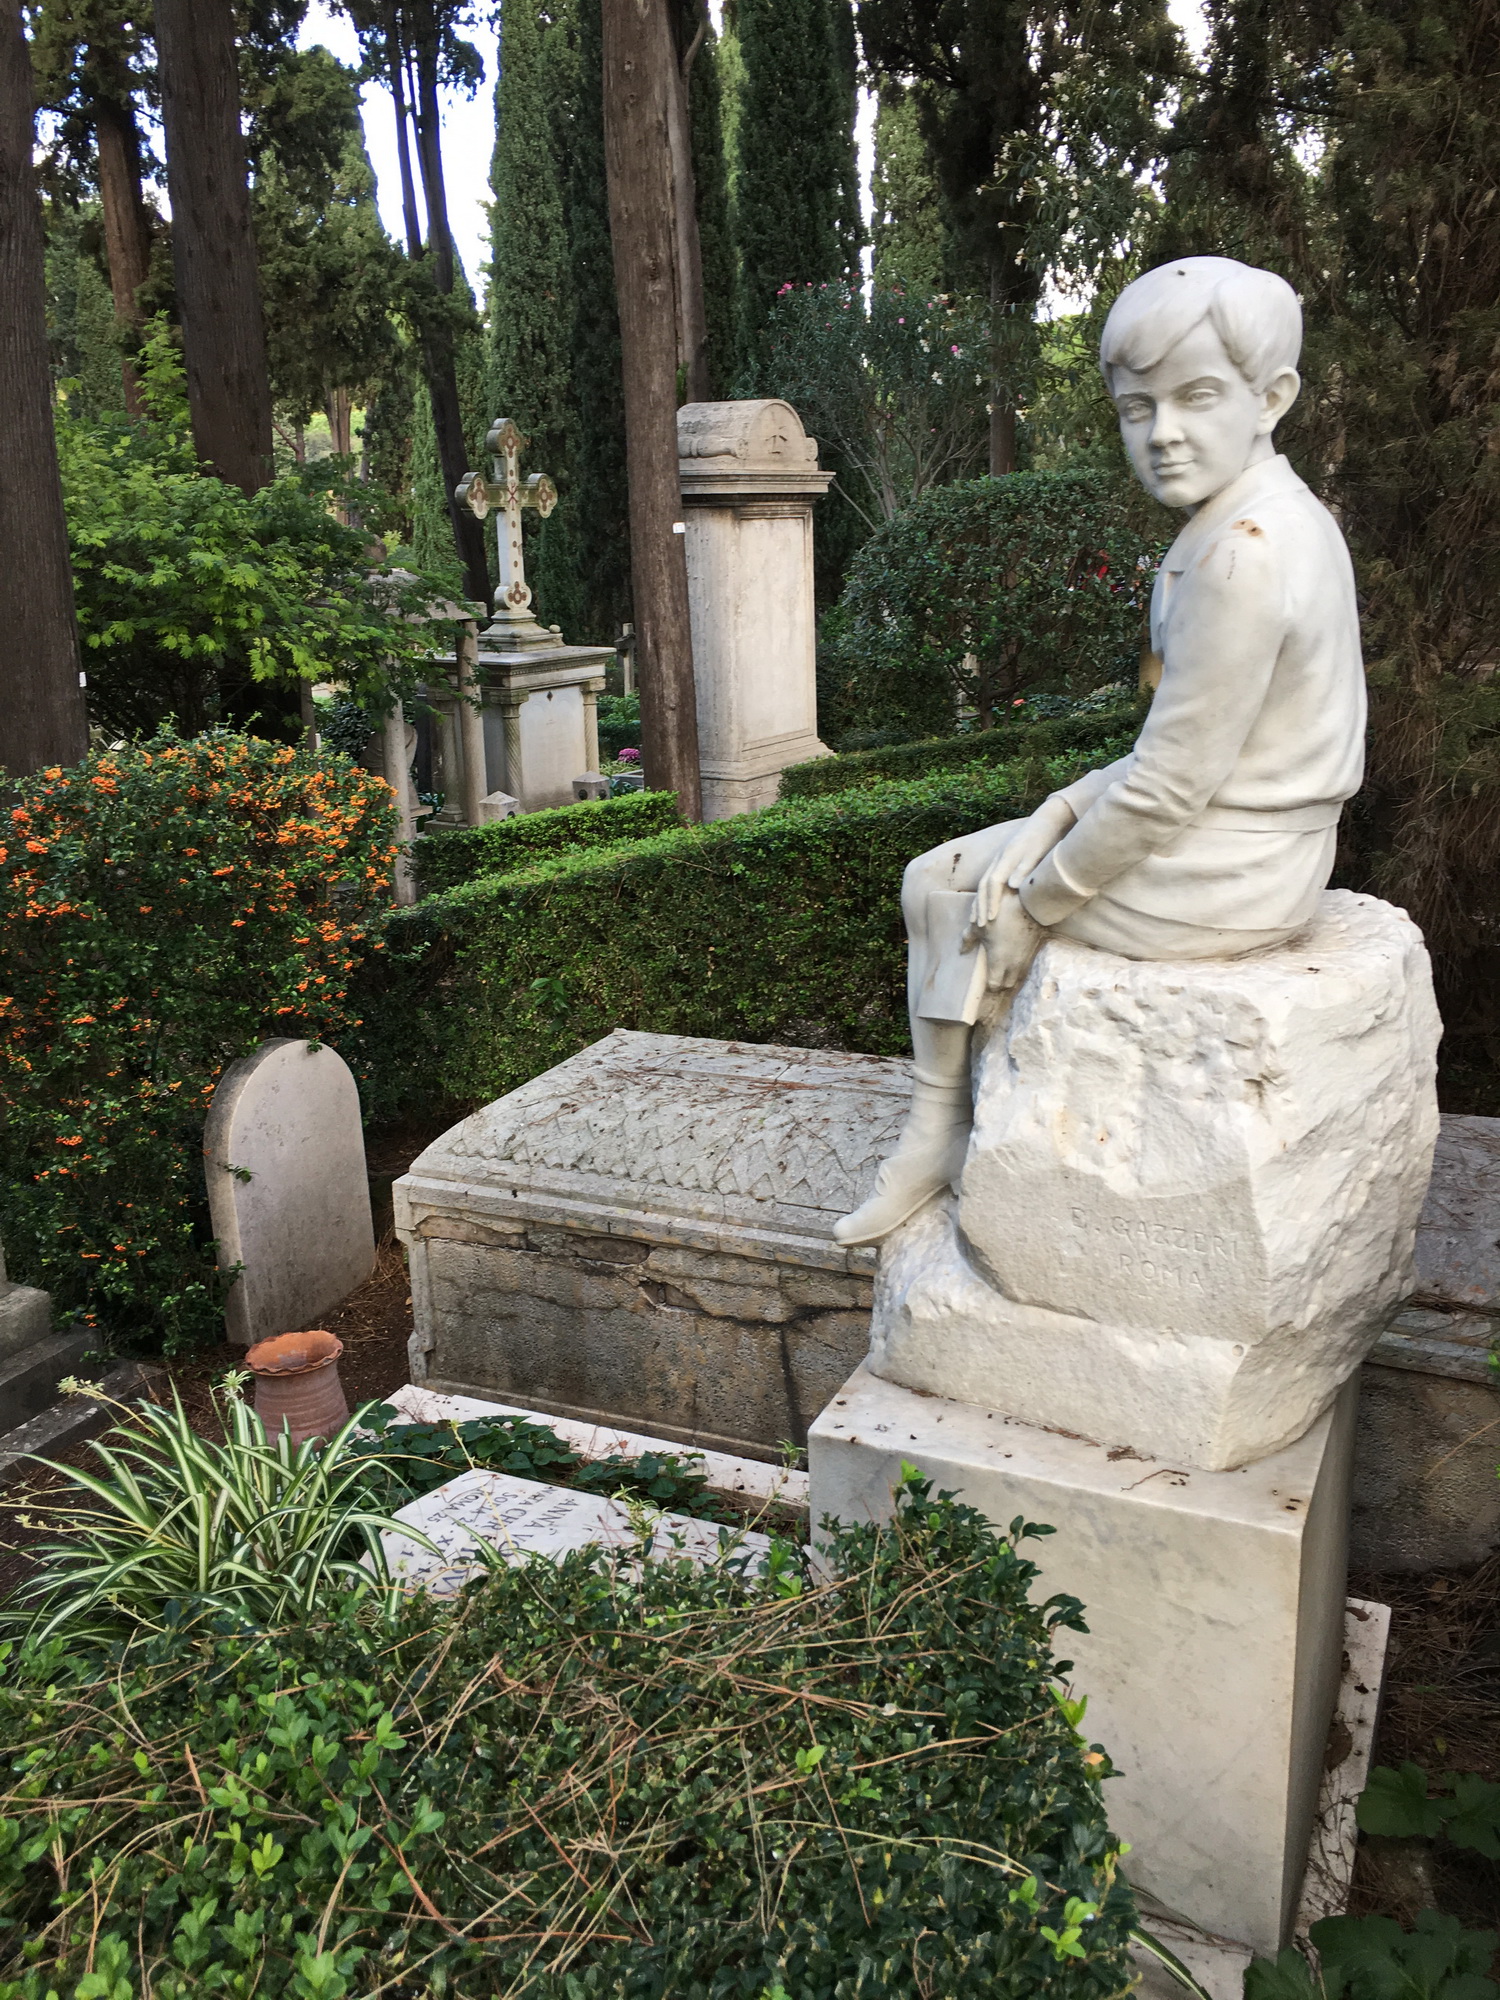 Boy sculpture in Rome's protestant cemetery